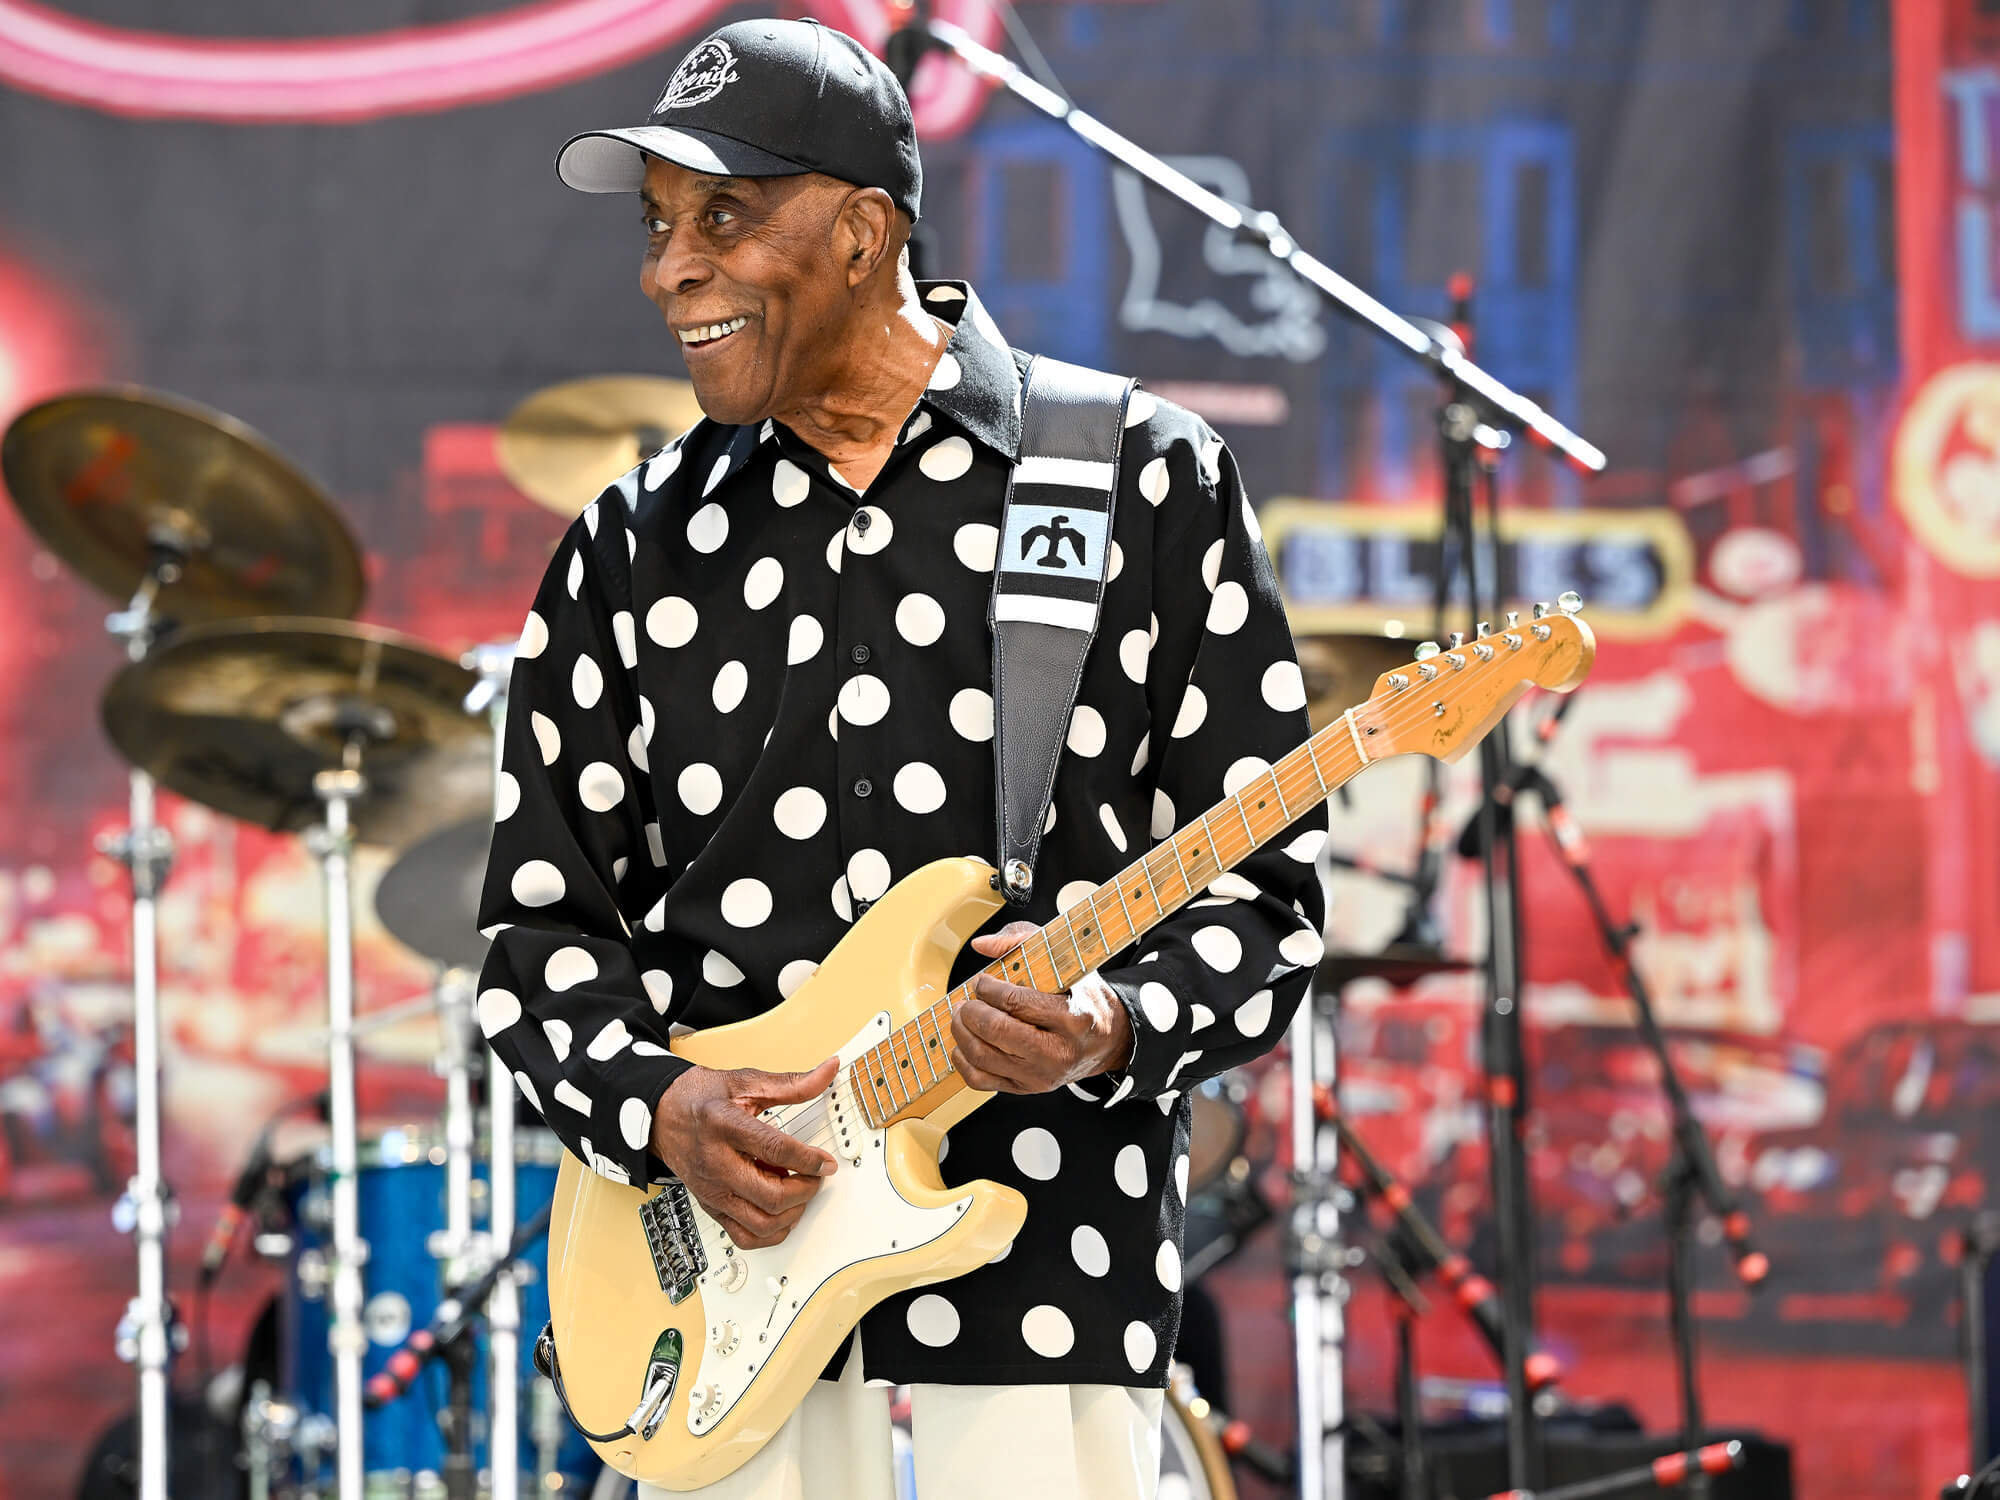 Buddy Guy wearing a black and white polka dot shirt, playing a blonde Stratocaster